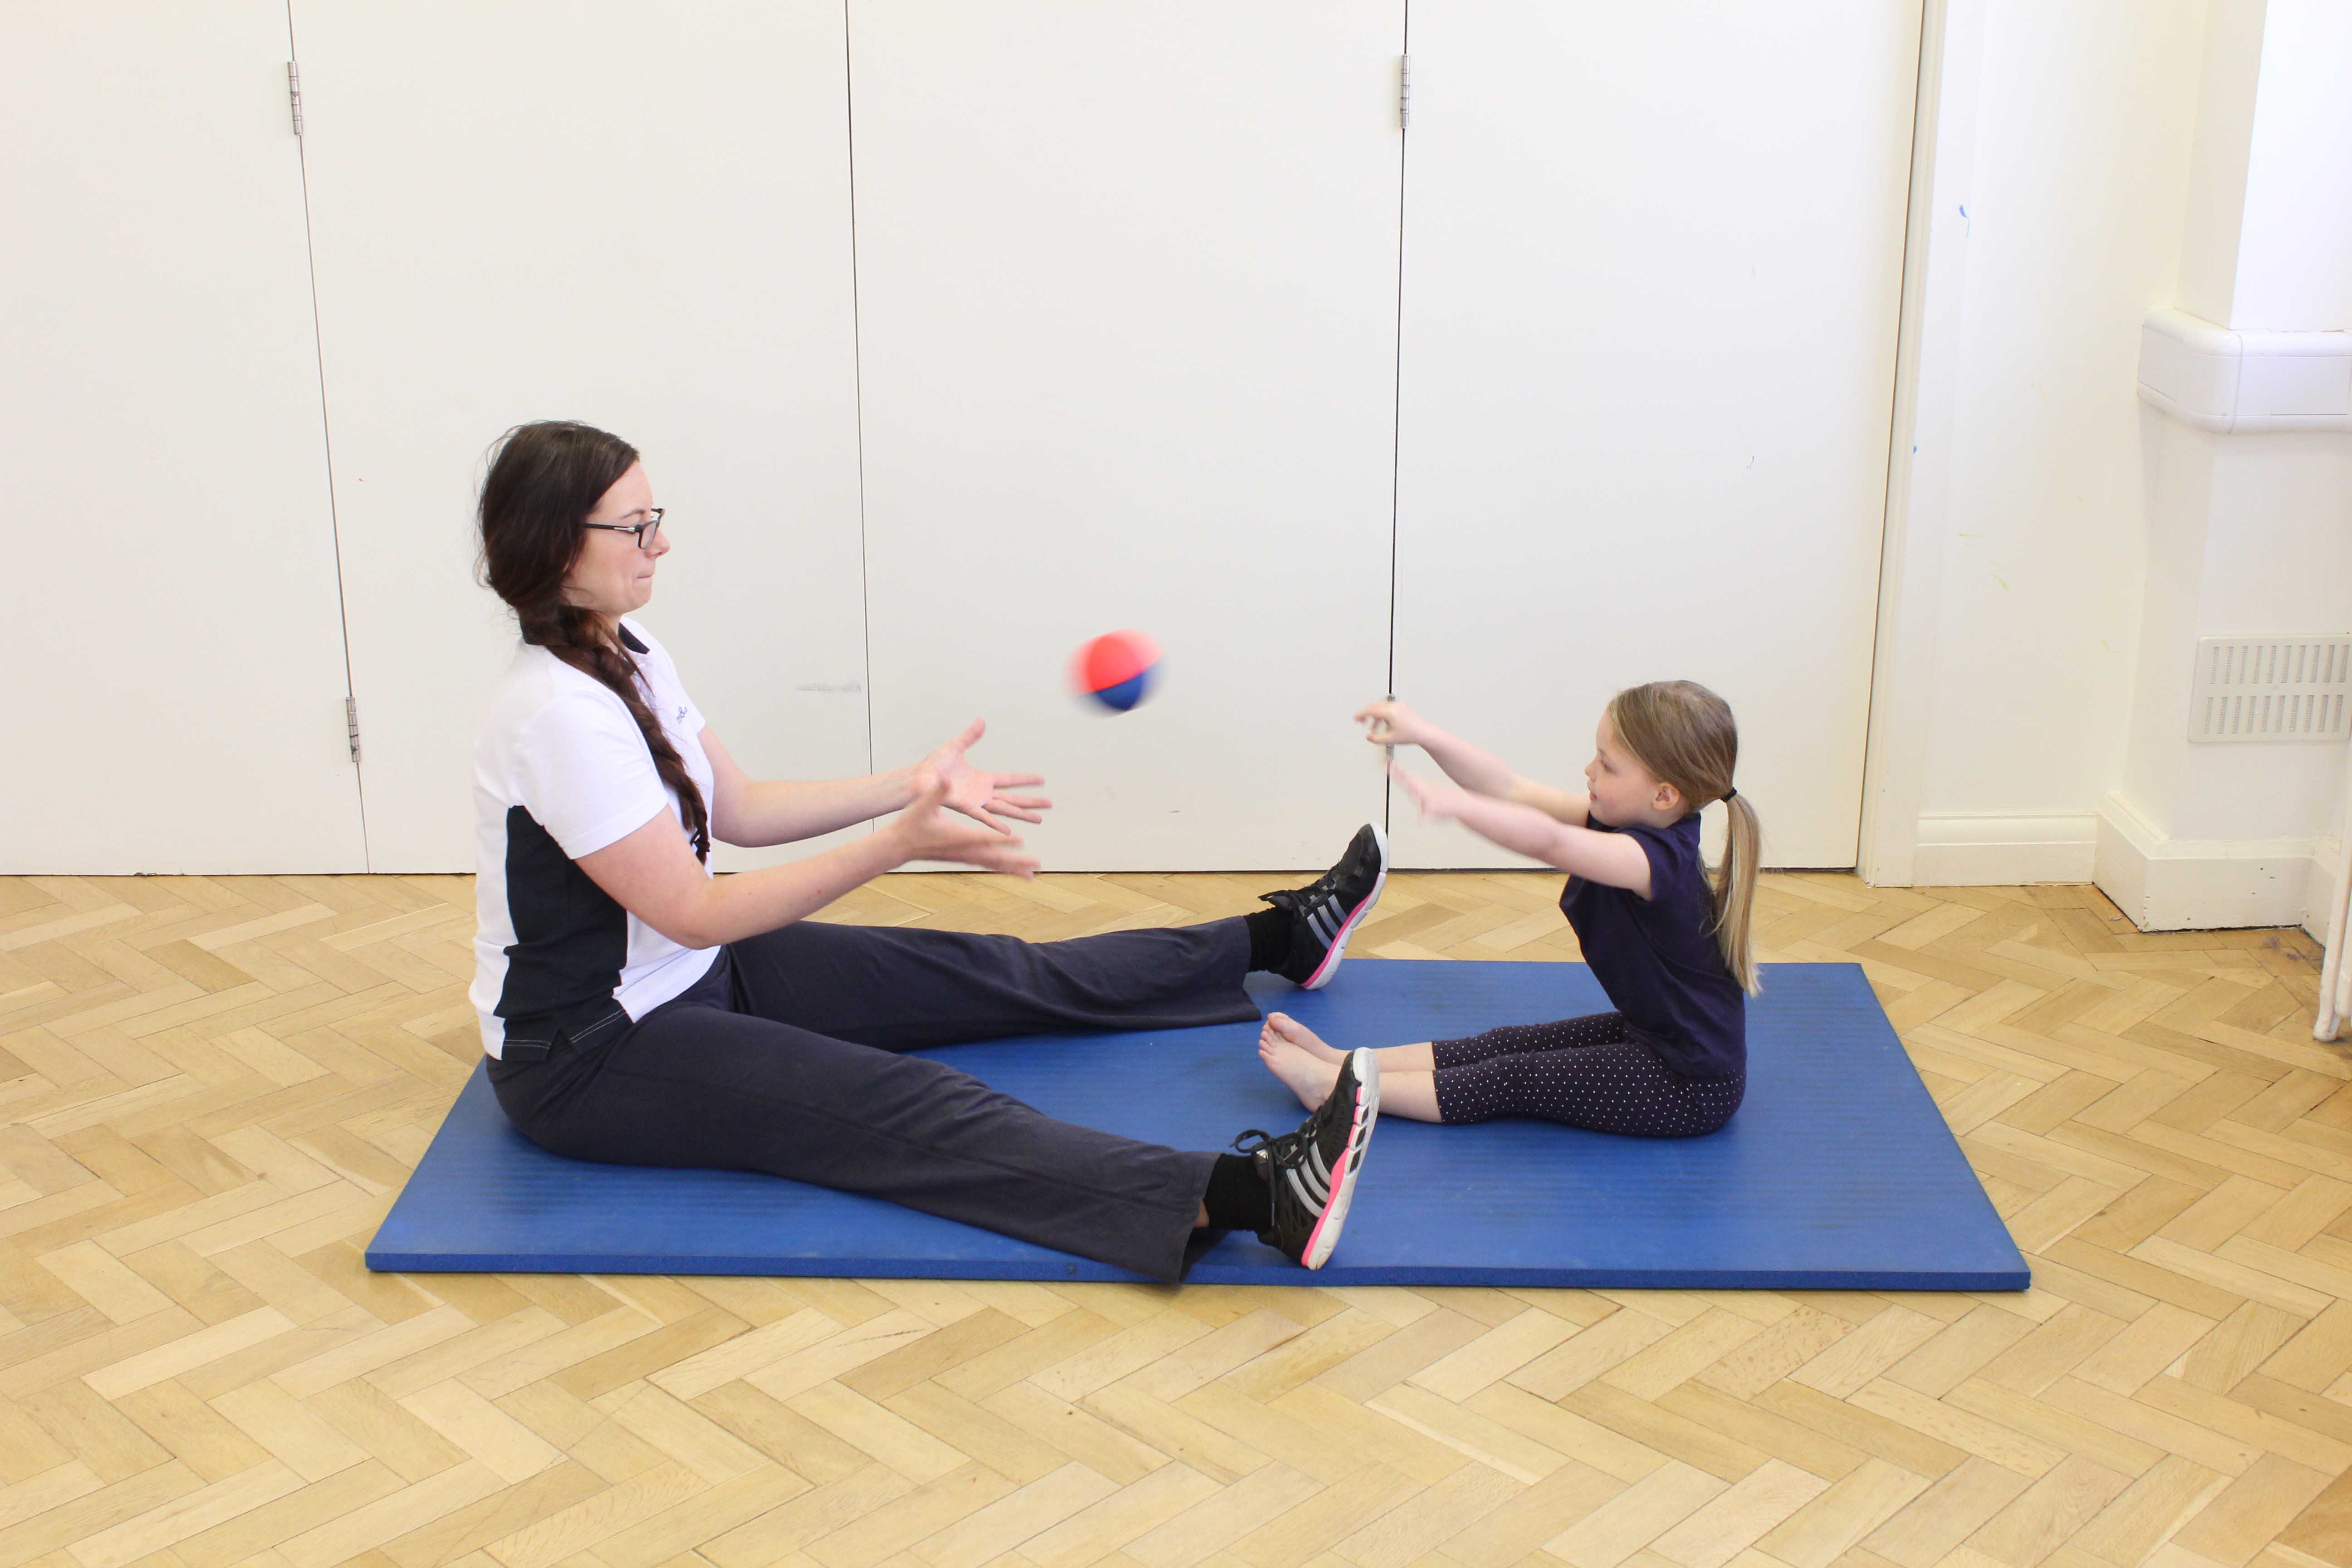 Maintaining upper limb mobility through structered play exercises